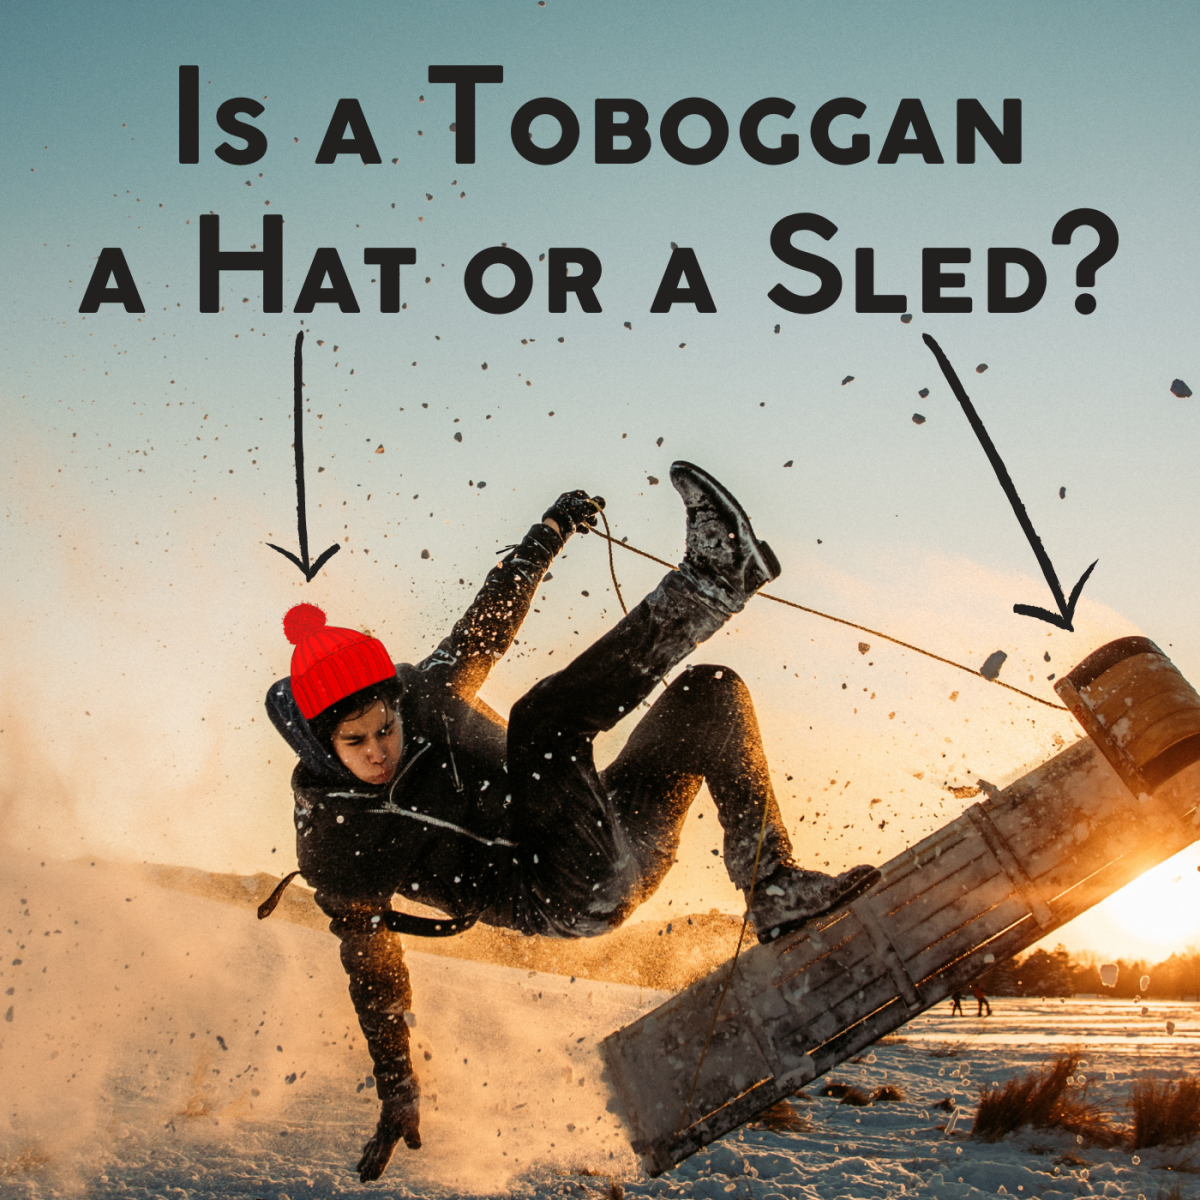 What Is a Toboggan: Hat or Sled?